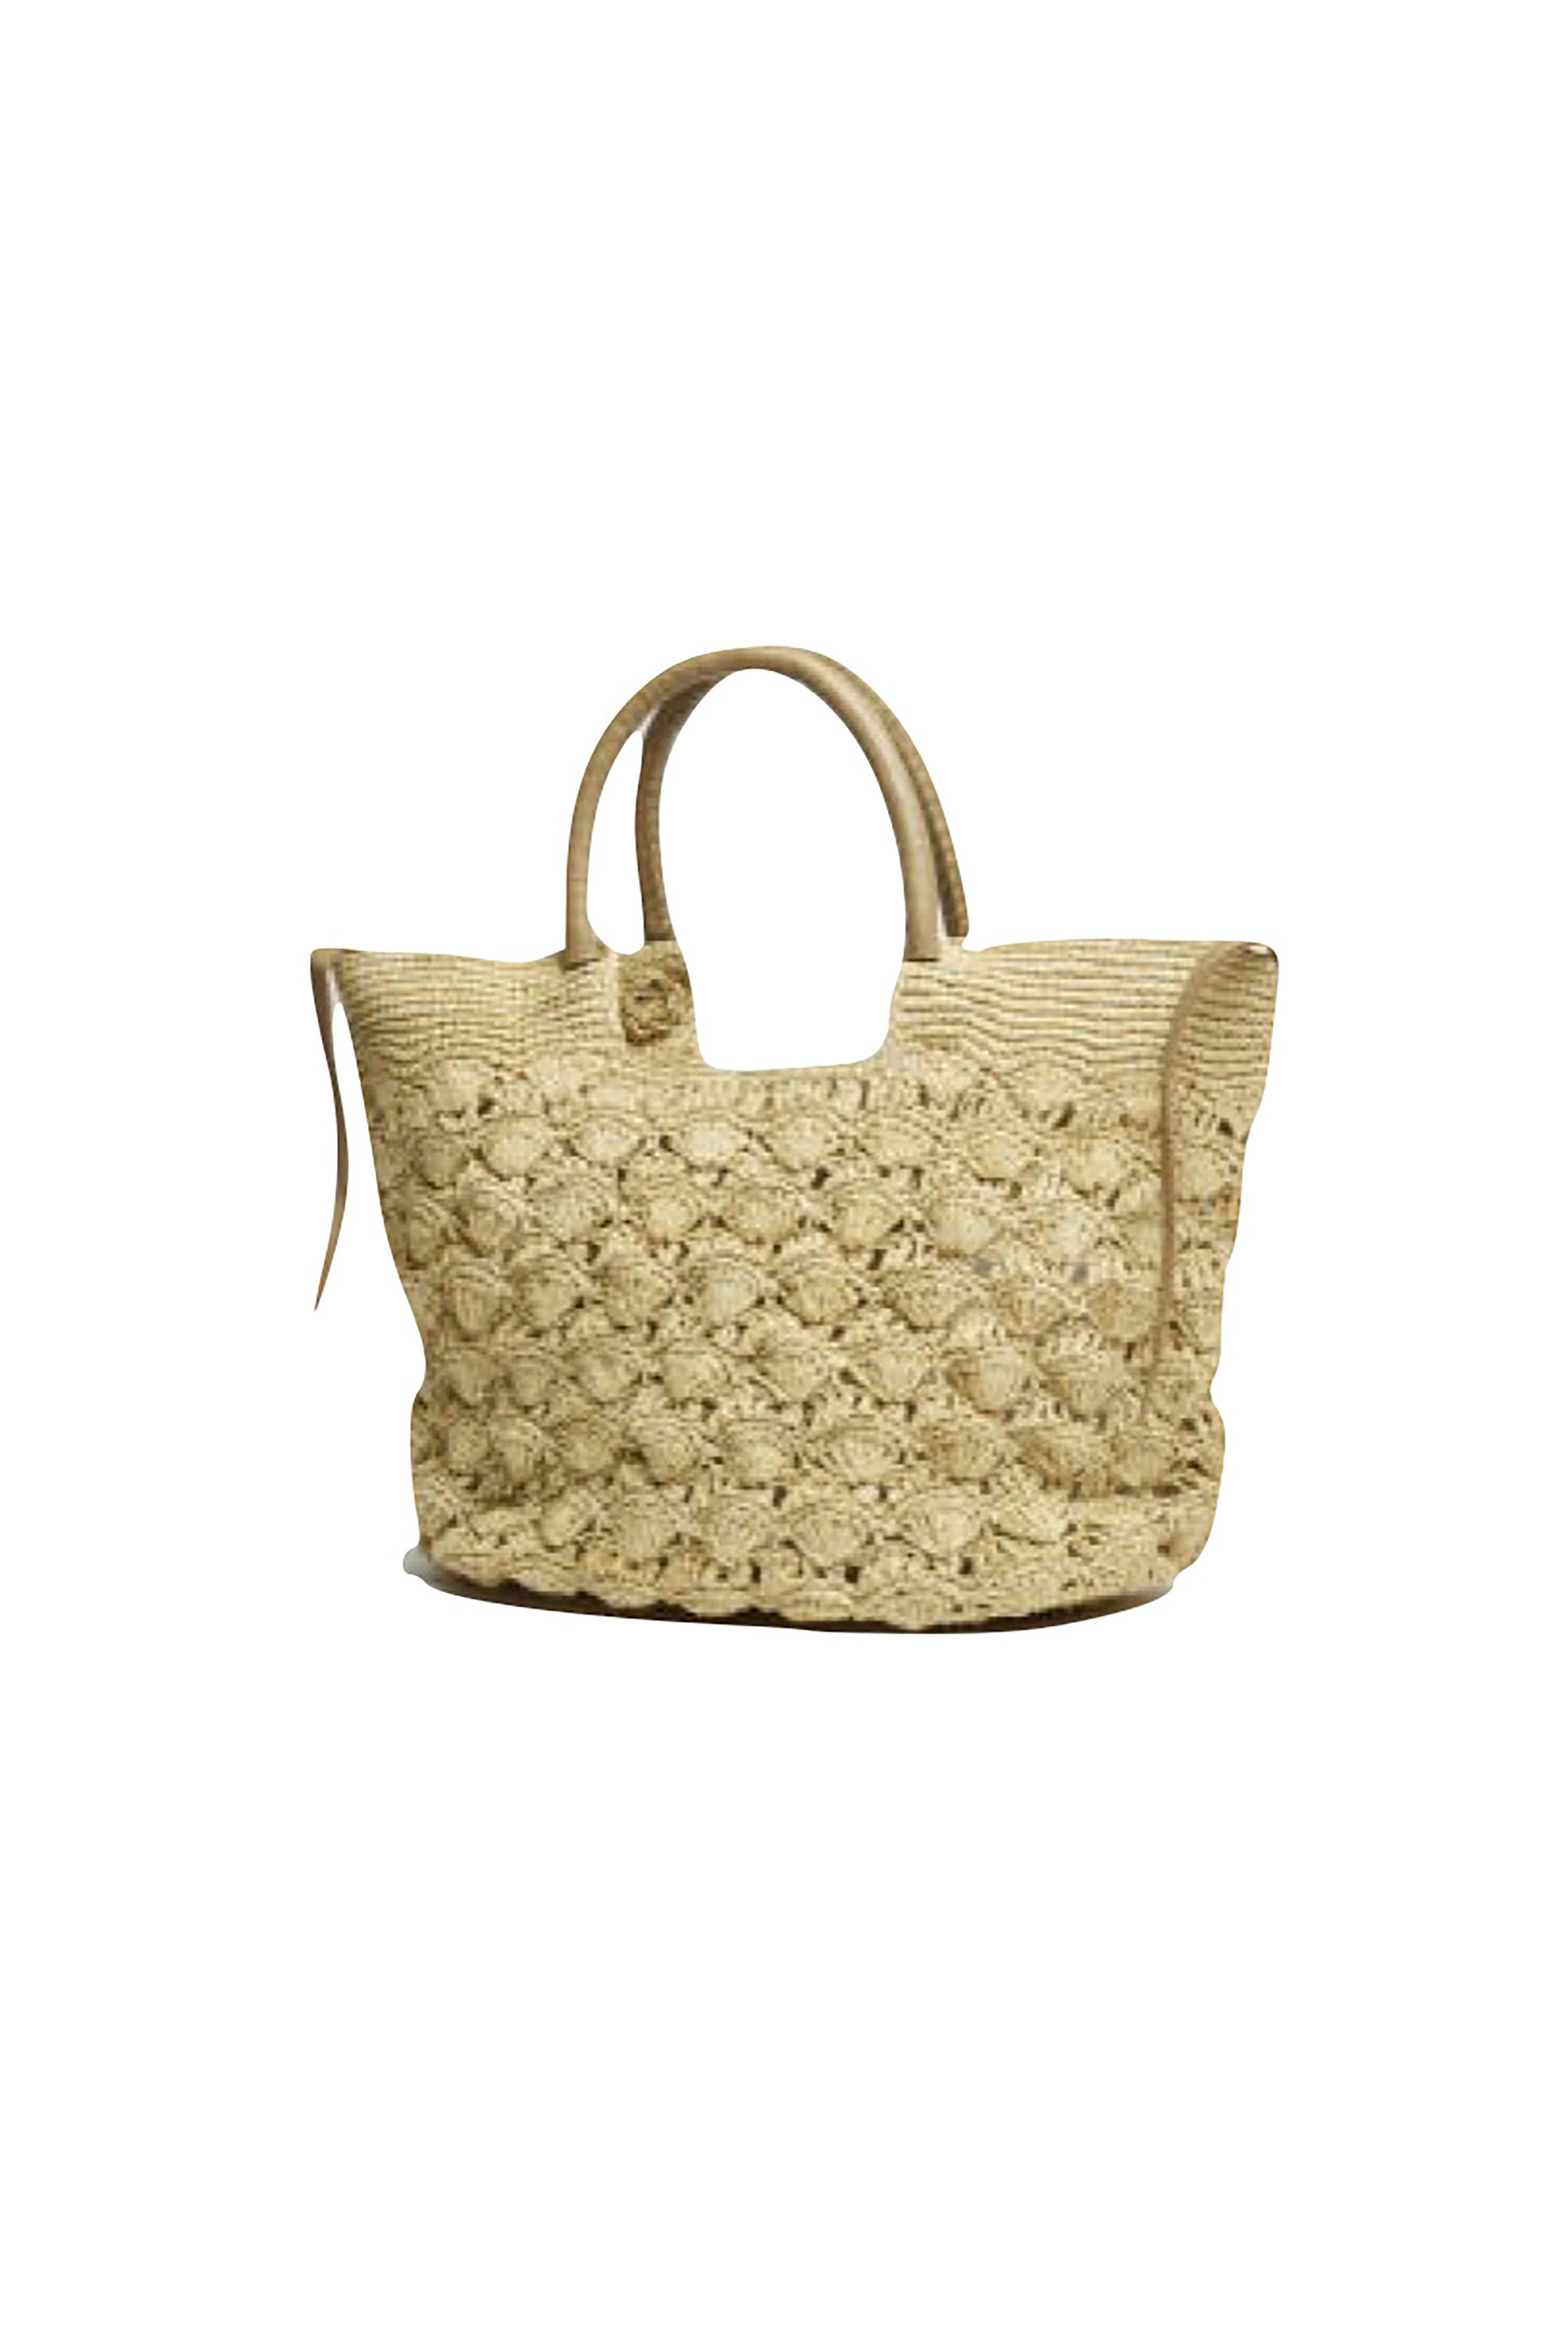 Caisse PM Crochet Straw Tote